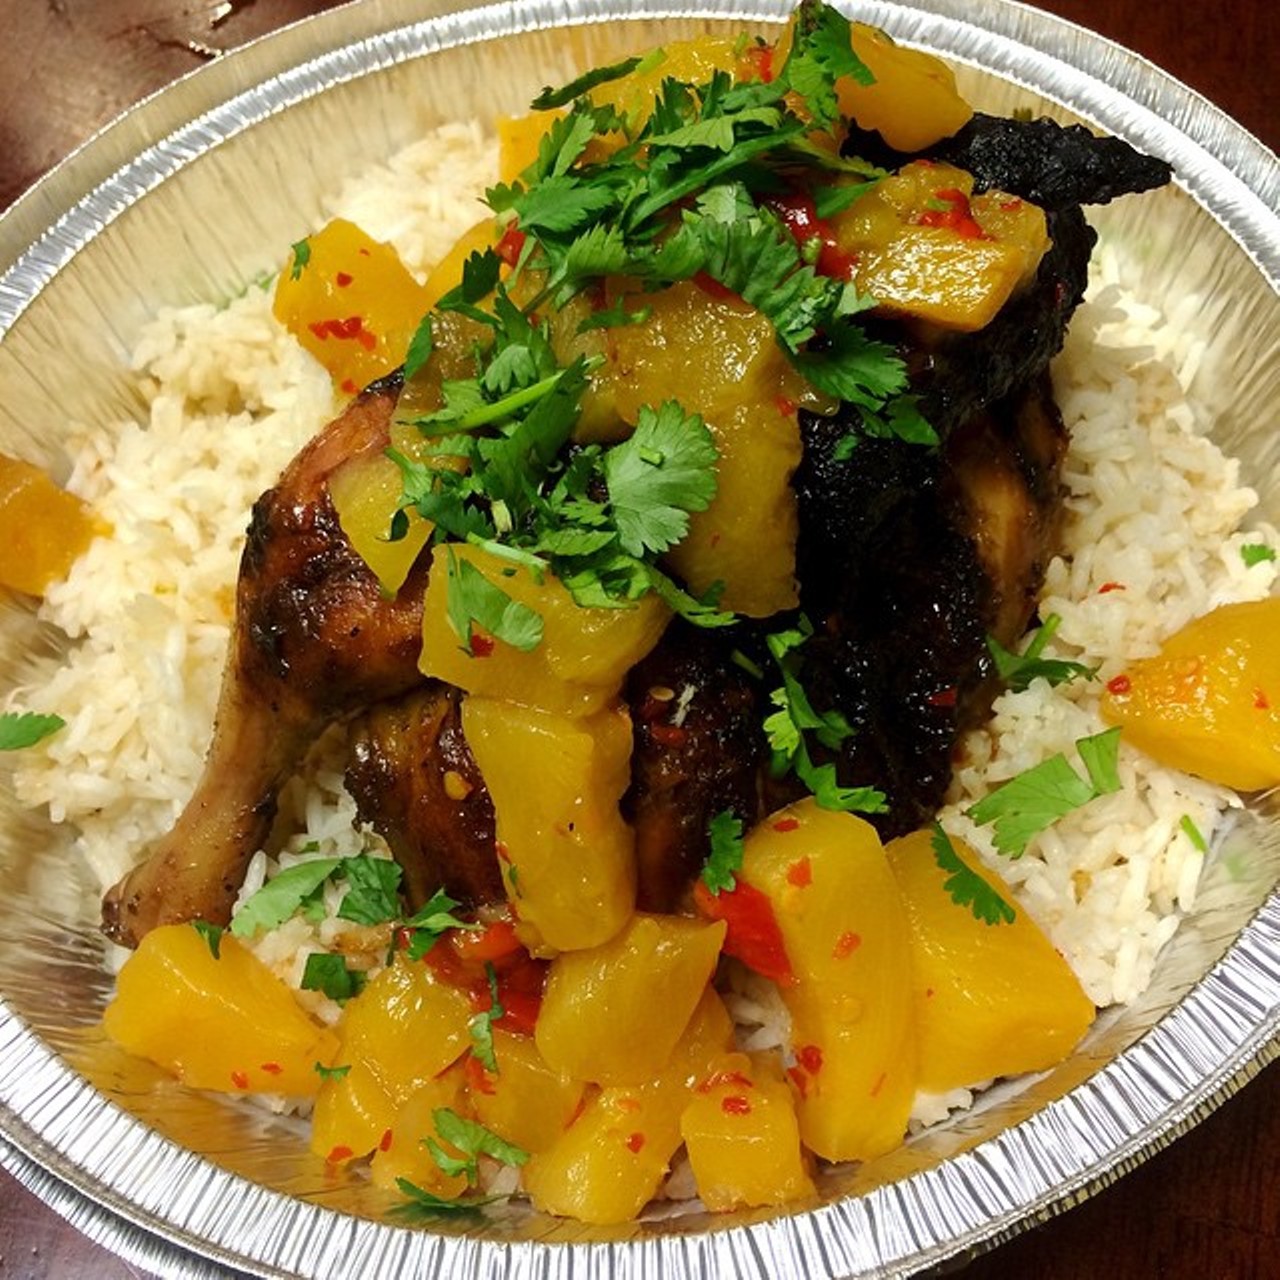 Coco tropical split rotisserie chicken served over coconut rice and a spicy pineapple and mango chutney from the Campus Grille.